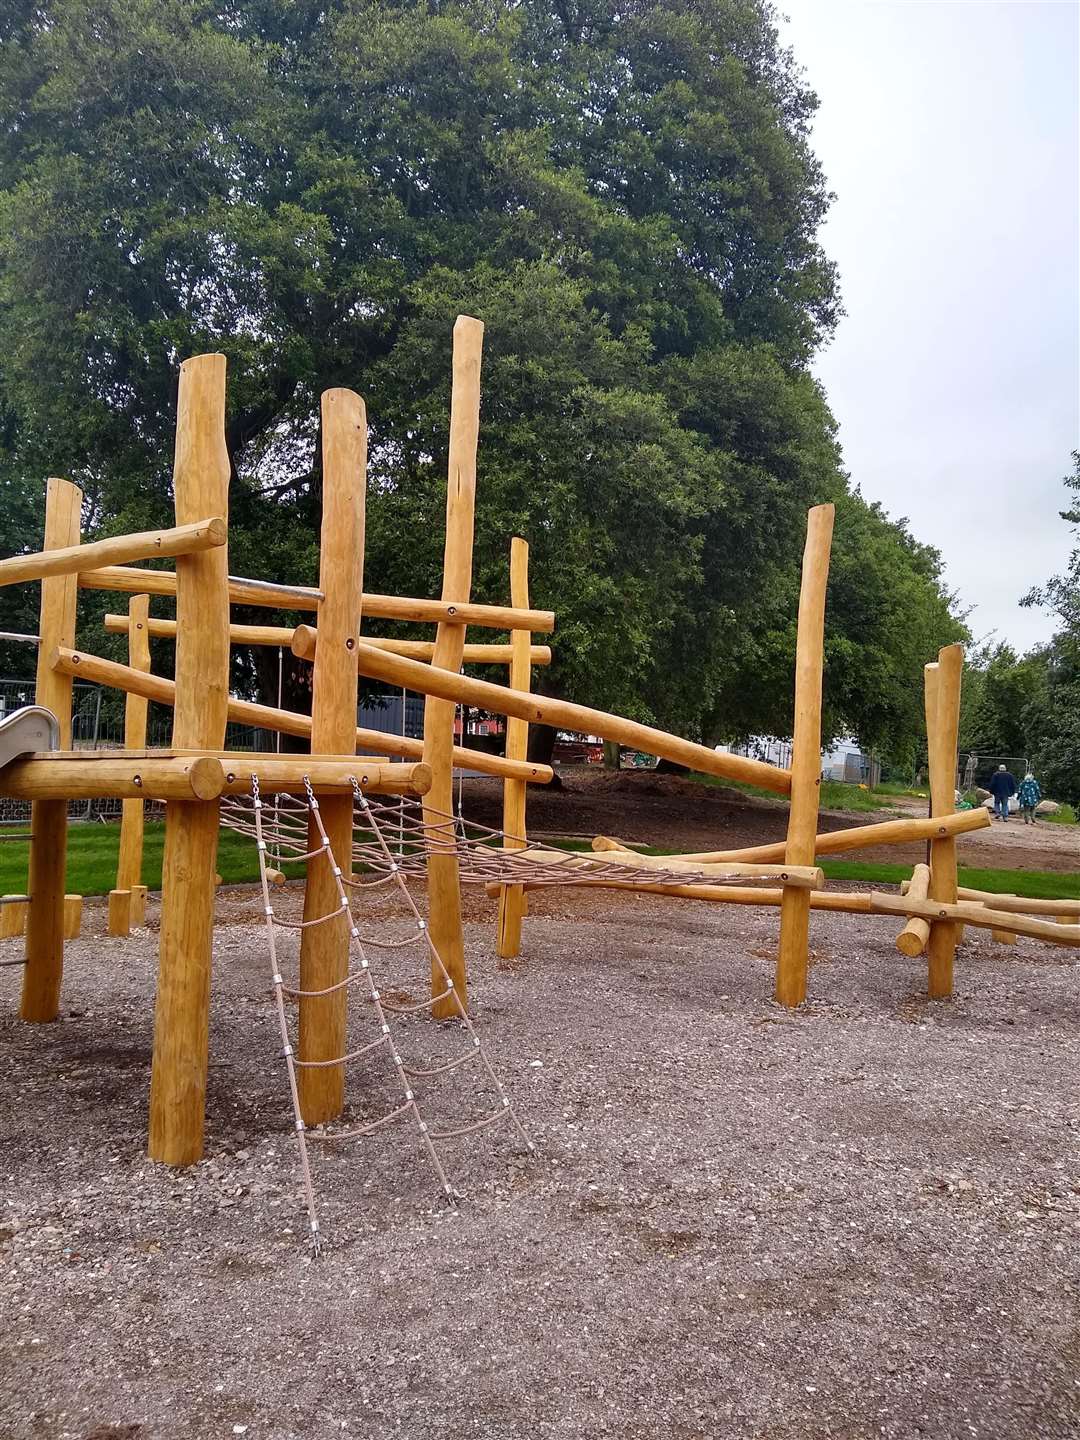 The new play area at Ellington Park. Picture: Carlos Dominguez, Thanet Property Photography